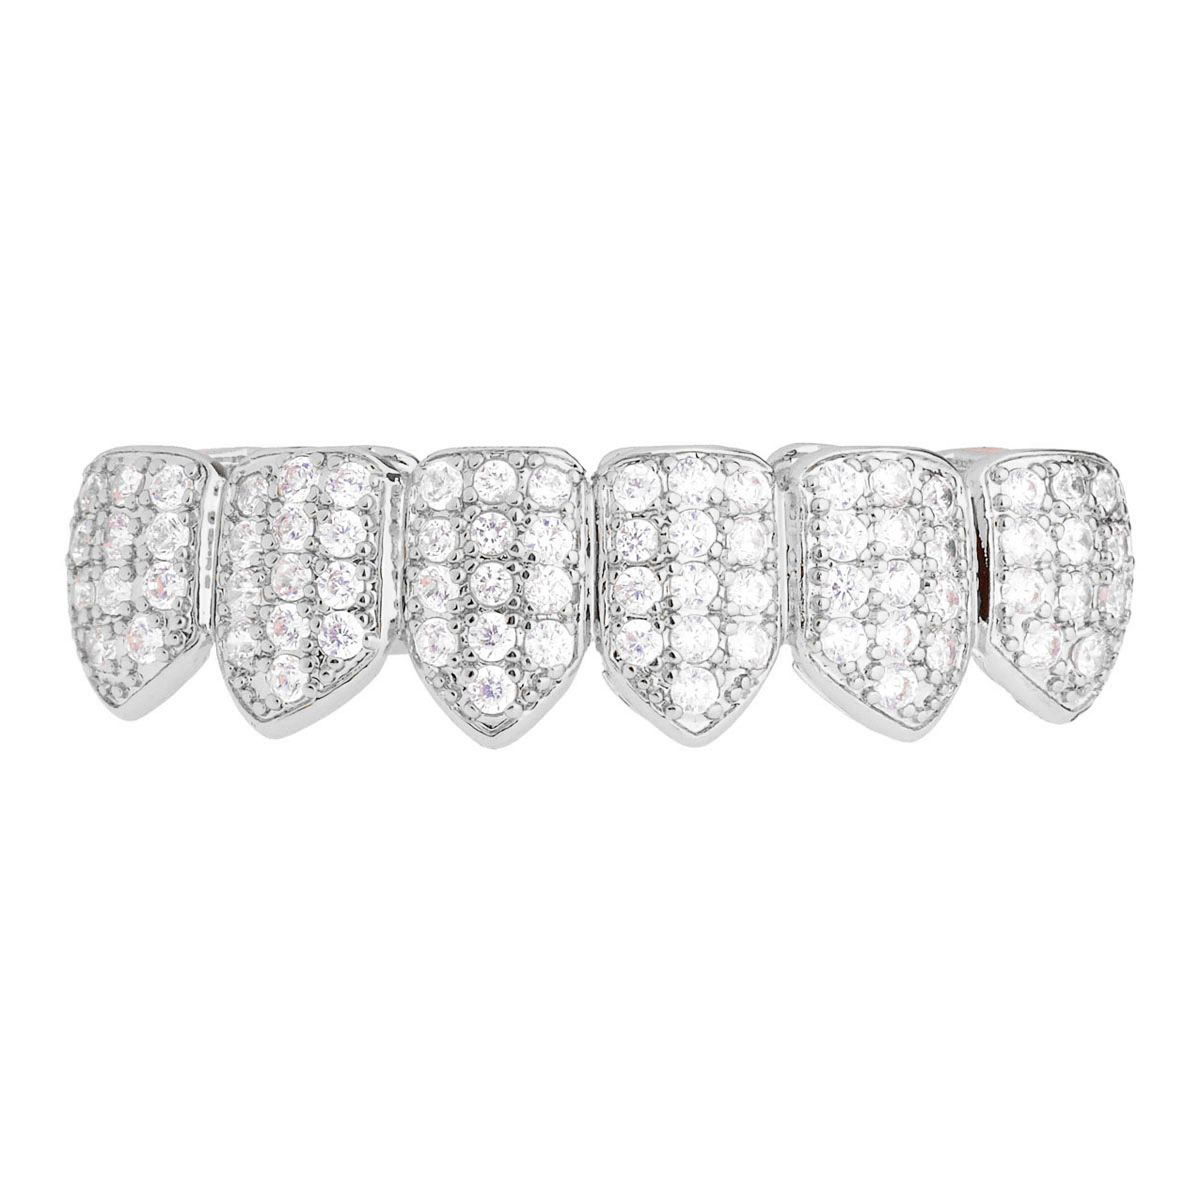 Grillz – Silber – One size fits all – CUBIC ZIRKONIA Bottom